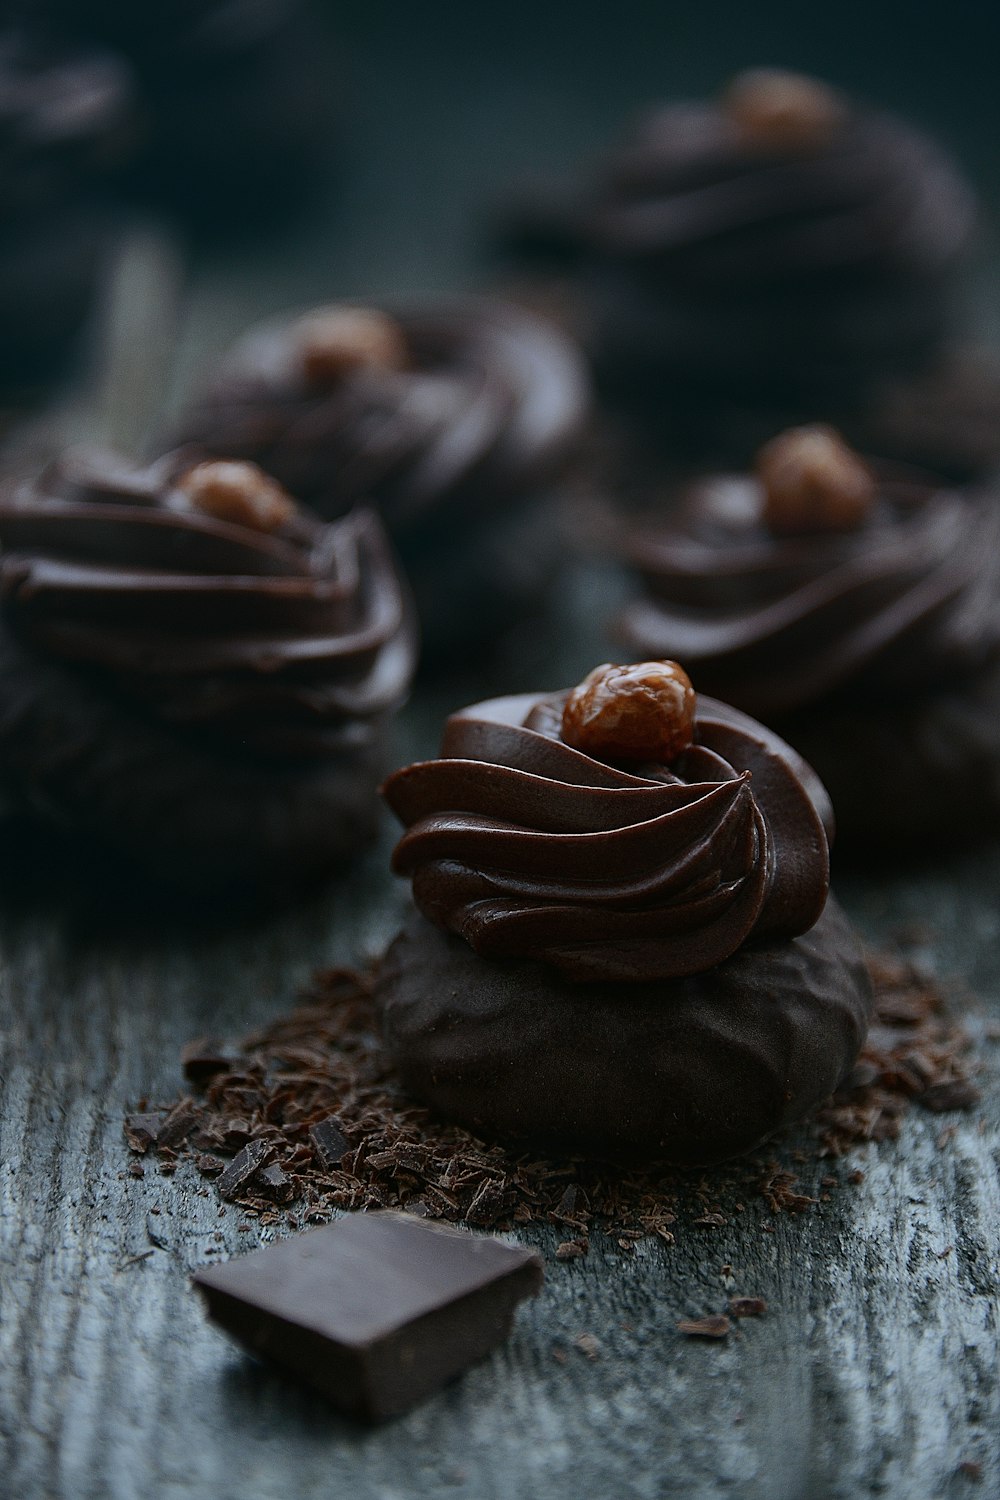 a chocolate cupcake with chocolate frosting and a small chocolate bar